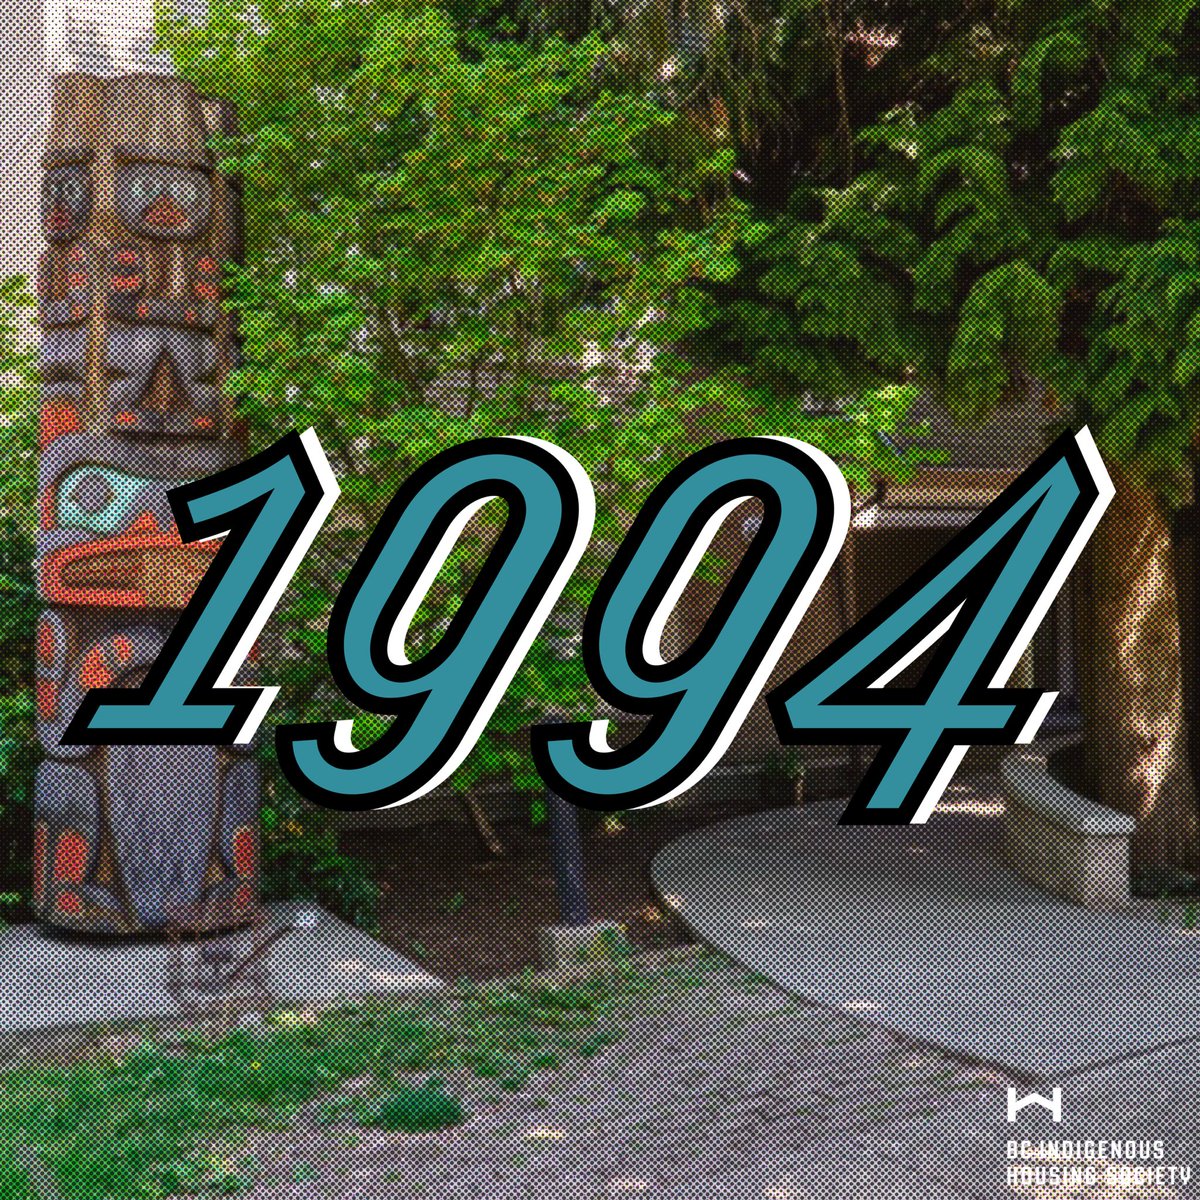 Celebrating 40 Years of Impact! 

In December 1994, B.C. Indigenous Housing Society, in partnership with Canada Mortgage & Housing Corporation, opened a building under the Post 85 Urban Native Housing Program located at 1725 East Pender Street. 

#BCIHS #40YearsStrong #Community